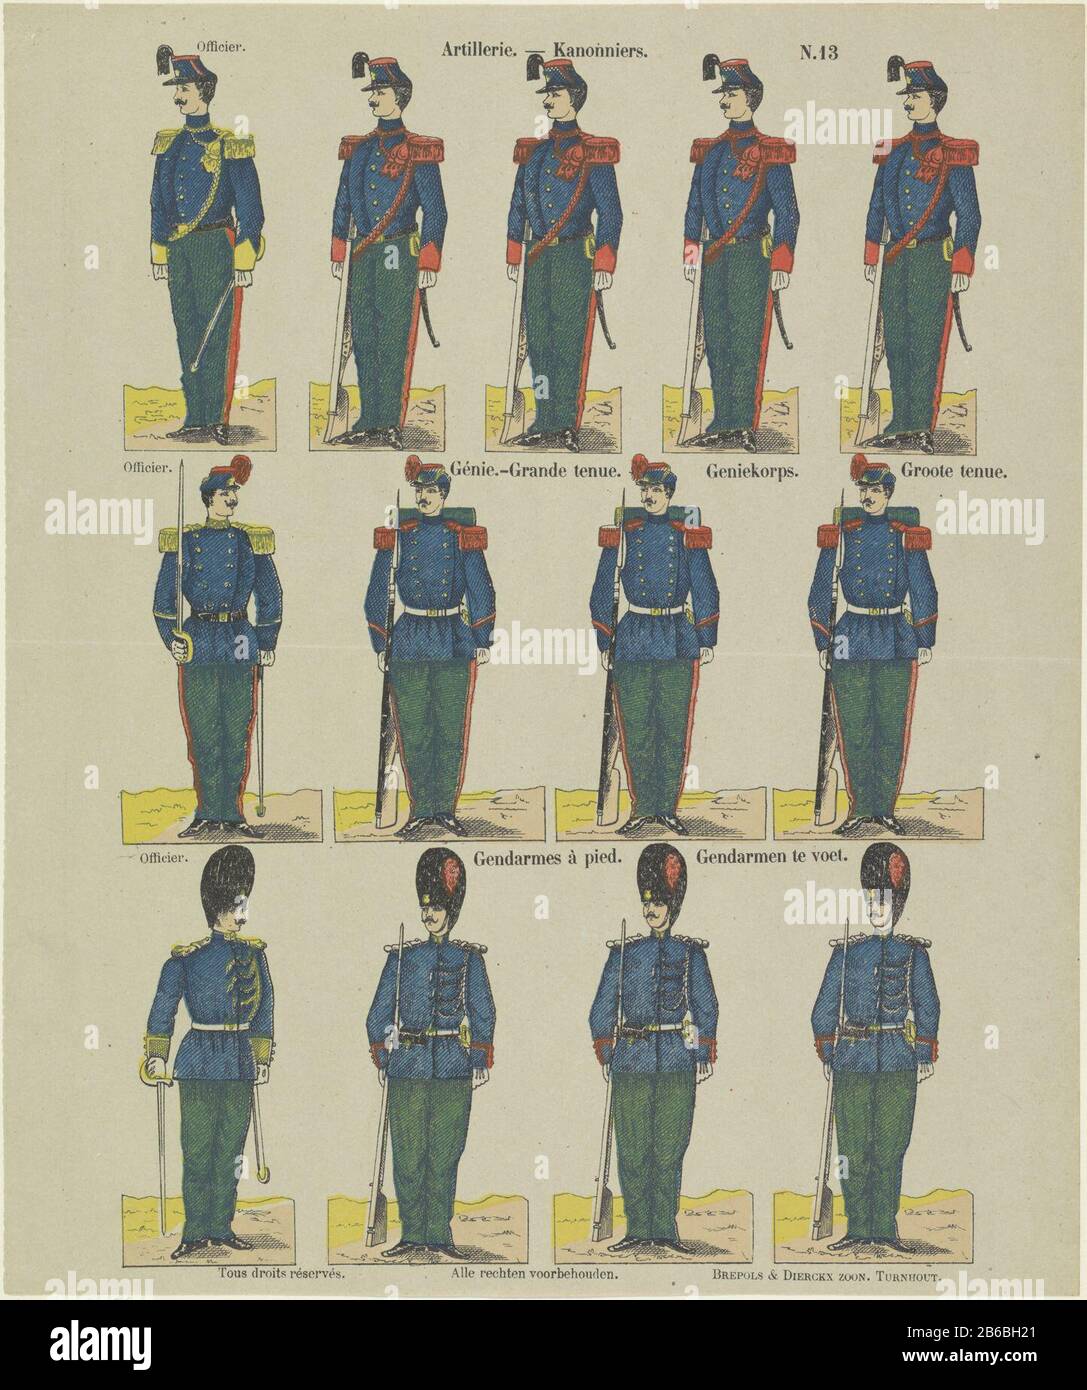 Artillery / Gunners / Génie.-Grande dress / Genius Corps great dress / Gendarmes à pied / Gendarmen foot (title object) Property Type: print people picture Item number: RP-P-OB-202.026 Inscriptions / Brands: collector's mark, verso, stamped: Lugt 2760octrooivermelding printed description: Leaf with three horizontal rows with a total of 13 performances of officers and soldiers with guns. Numbered top right: N. 13. Manufacturer : Publisher: Brepols & Dierckx son (listed building) printmaker: anonymous place manufacture Turnhout Dating: 1833 - 1911 Physical characteristics: color lithograph in ye Stock Photo